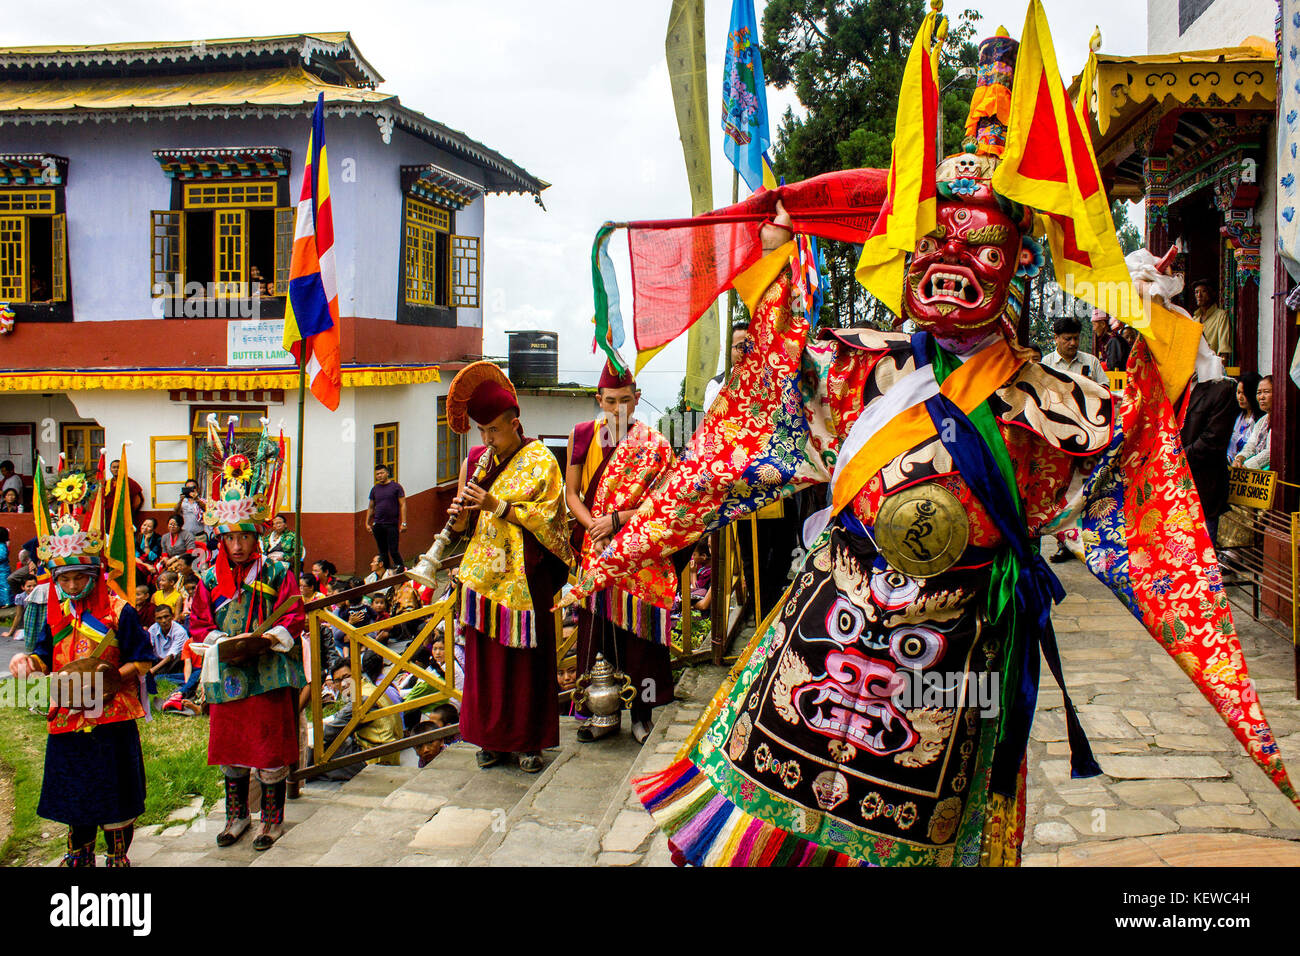 August 29, 2015 - Friendship, harmony, a lofty mountain and a wrathful deity ''” these are the four things that Pang Lhabsol, an annual festival in Sikkim, is about. The peaceful hill-state was once torn apart by strife and enmity between the Lepchas and the Bhutias (of Tibetan origin). Locals believe that Pang Lhabsol was first celebrated sometime in the 13th century to mark the beginning of peaceful relations between the warring groups. Lepcha chief Thekongtek and Tibetan crown prince Khya Bumsa erected nine slabs at Kabilunchok (near Gangtok, the current capital), tied animal intestines aro Stock Photo